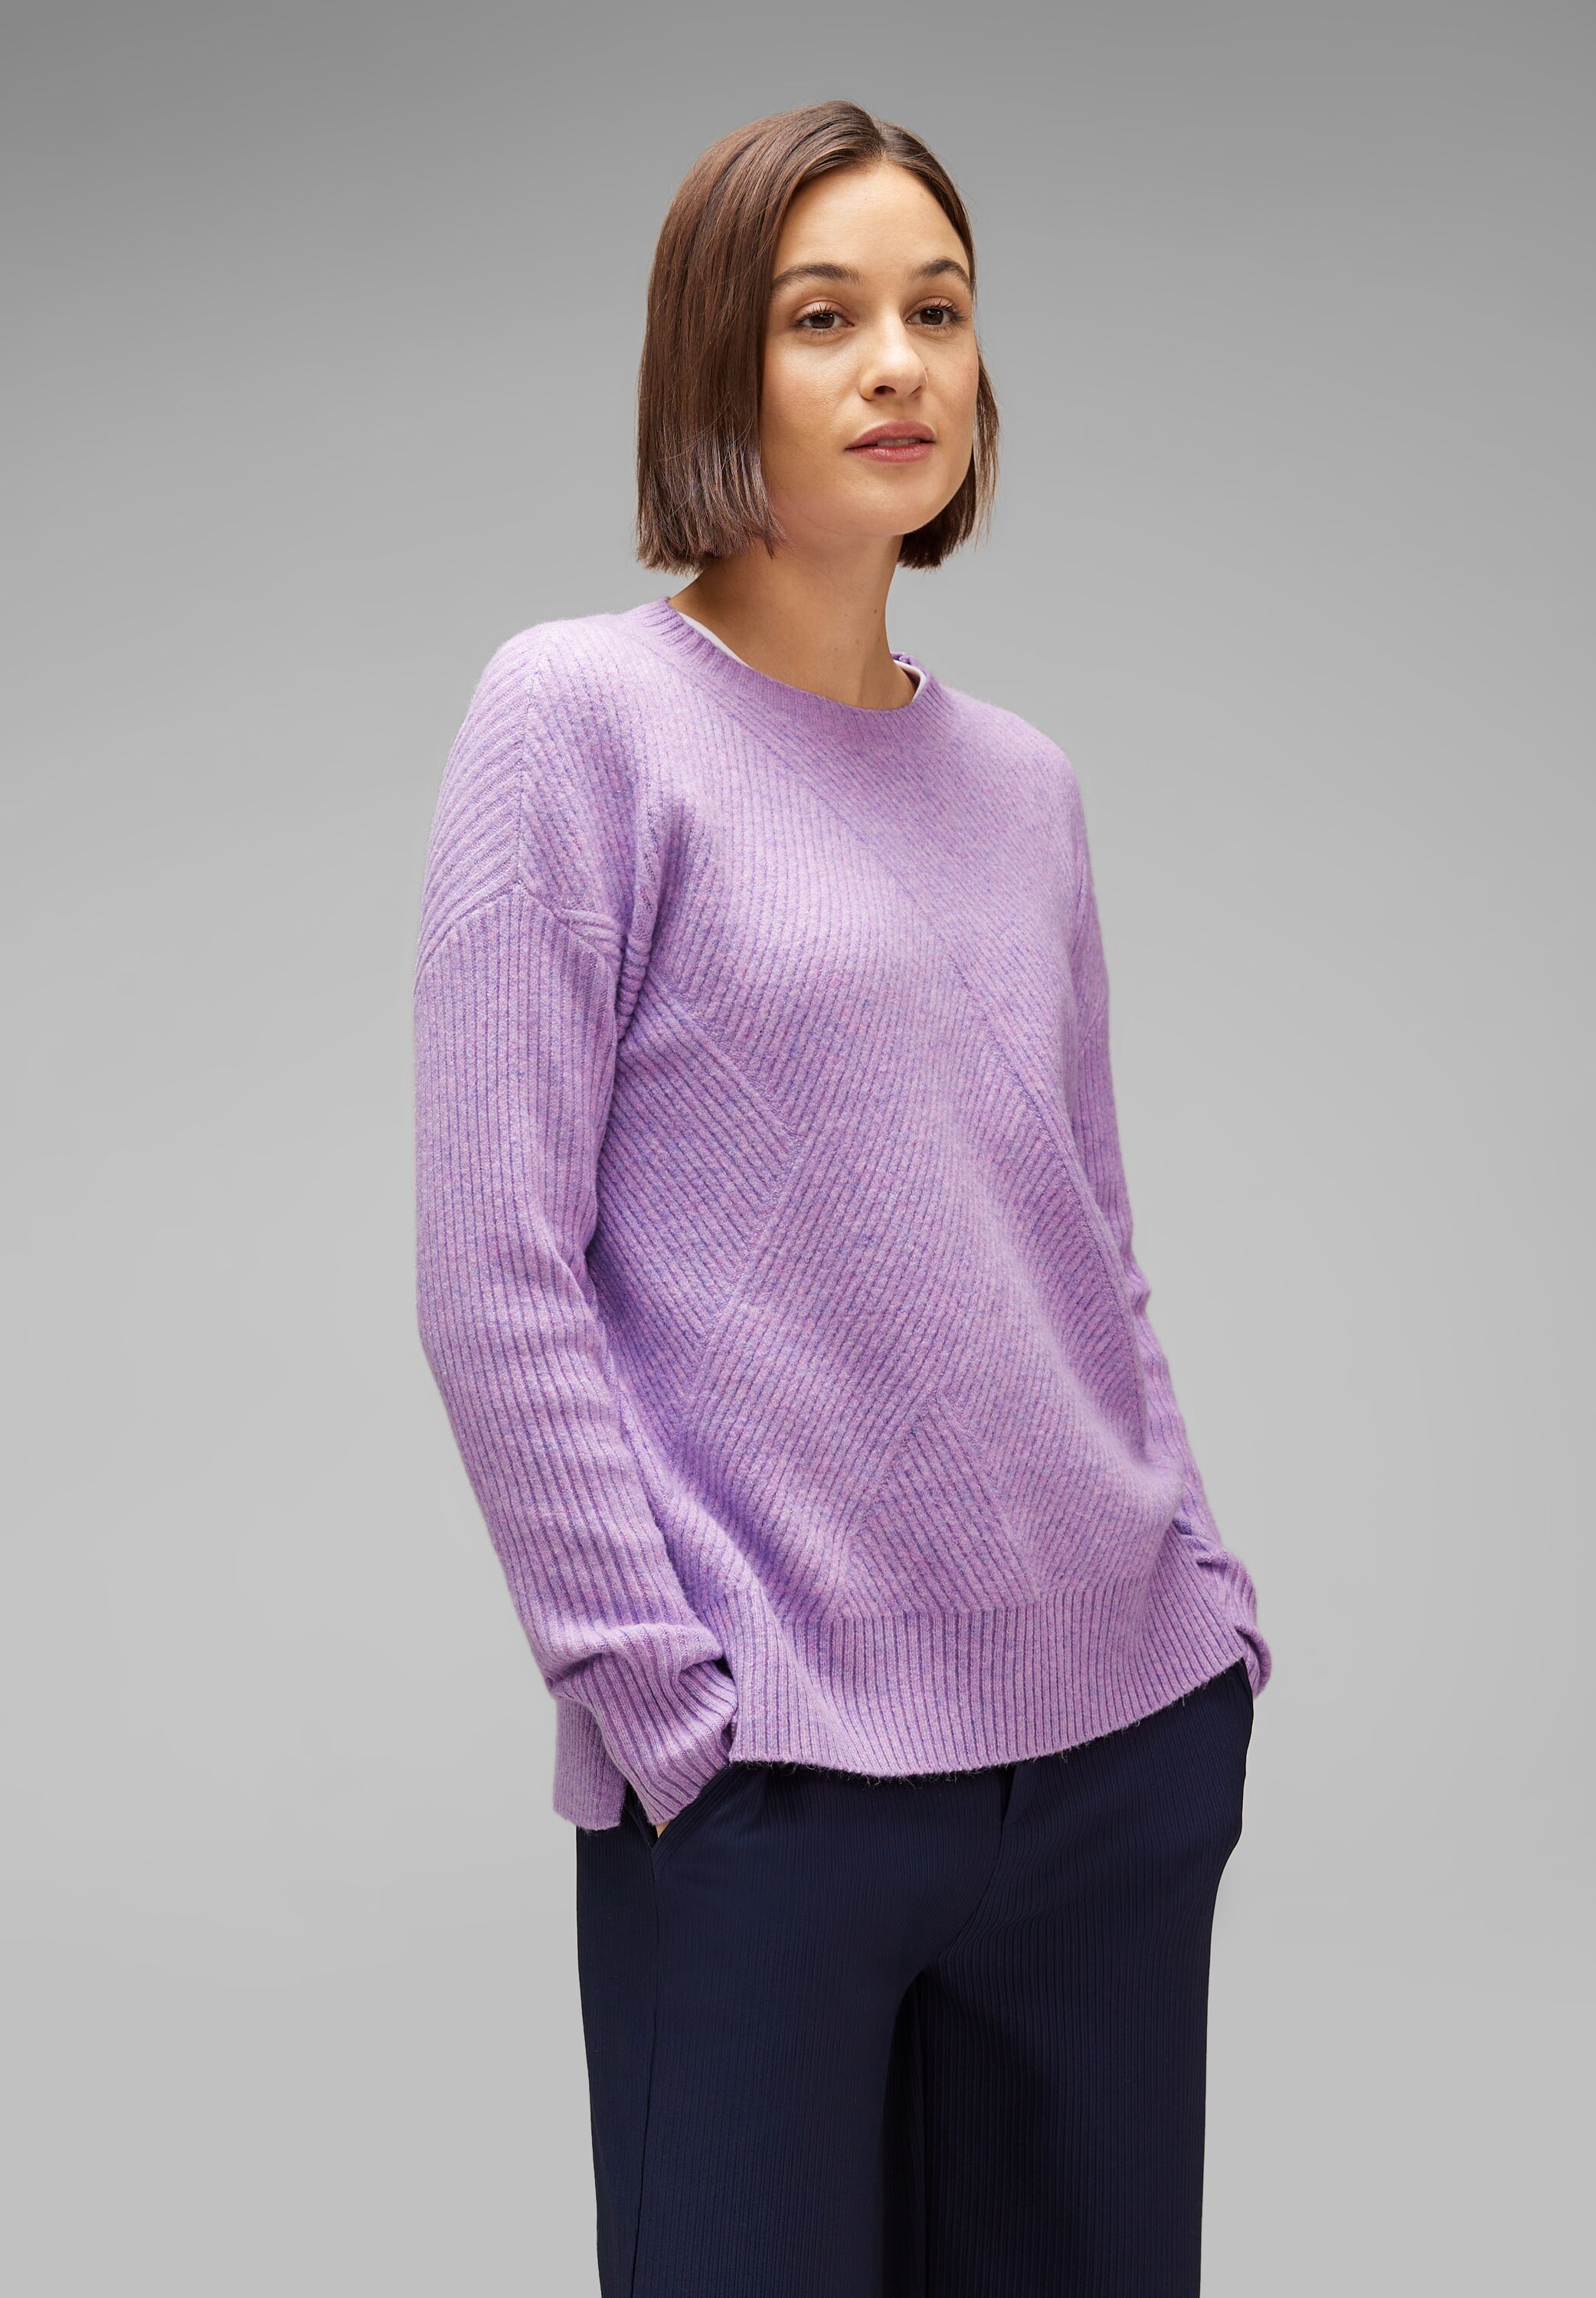 - Mode A302483-15290 CONCEPT Pure Soft in SALE reduziert Lilac Pullover Street One Melange im